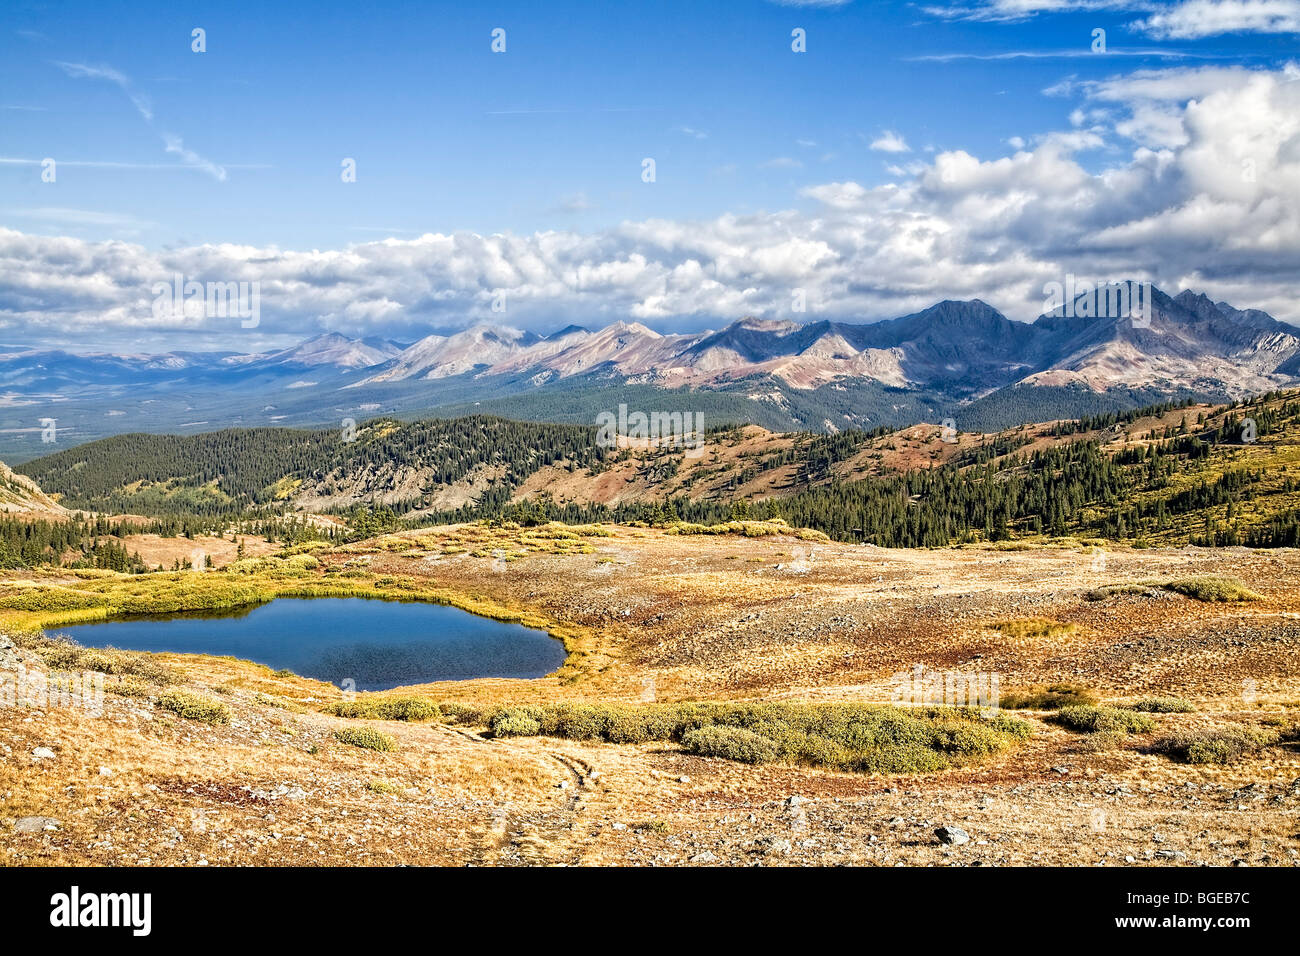 The landscape from Ohio Pass road west of Buena Vista, Colorado. Stock Photo